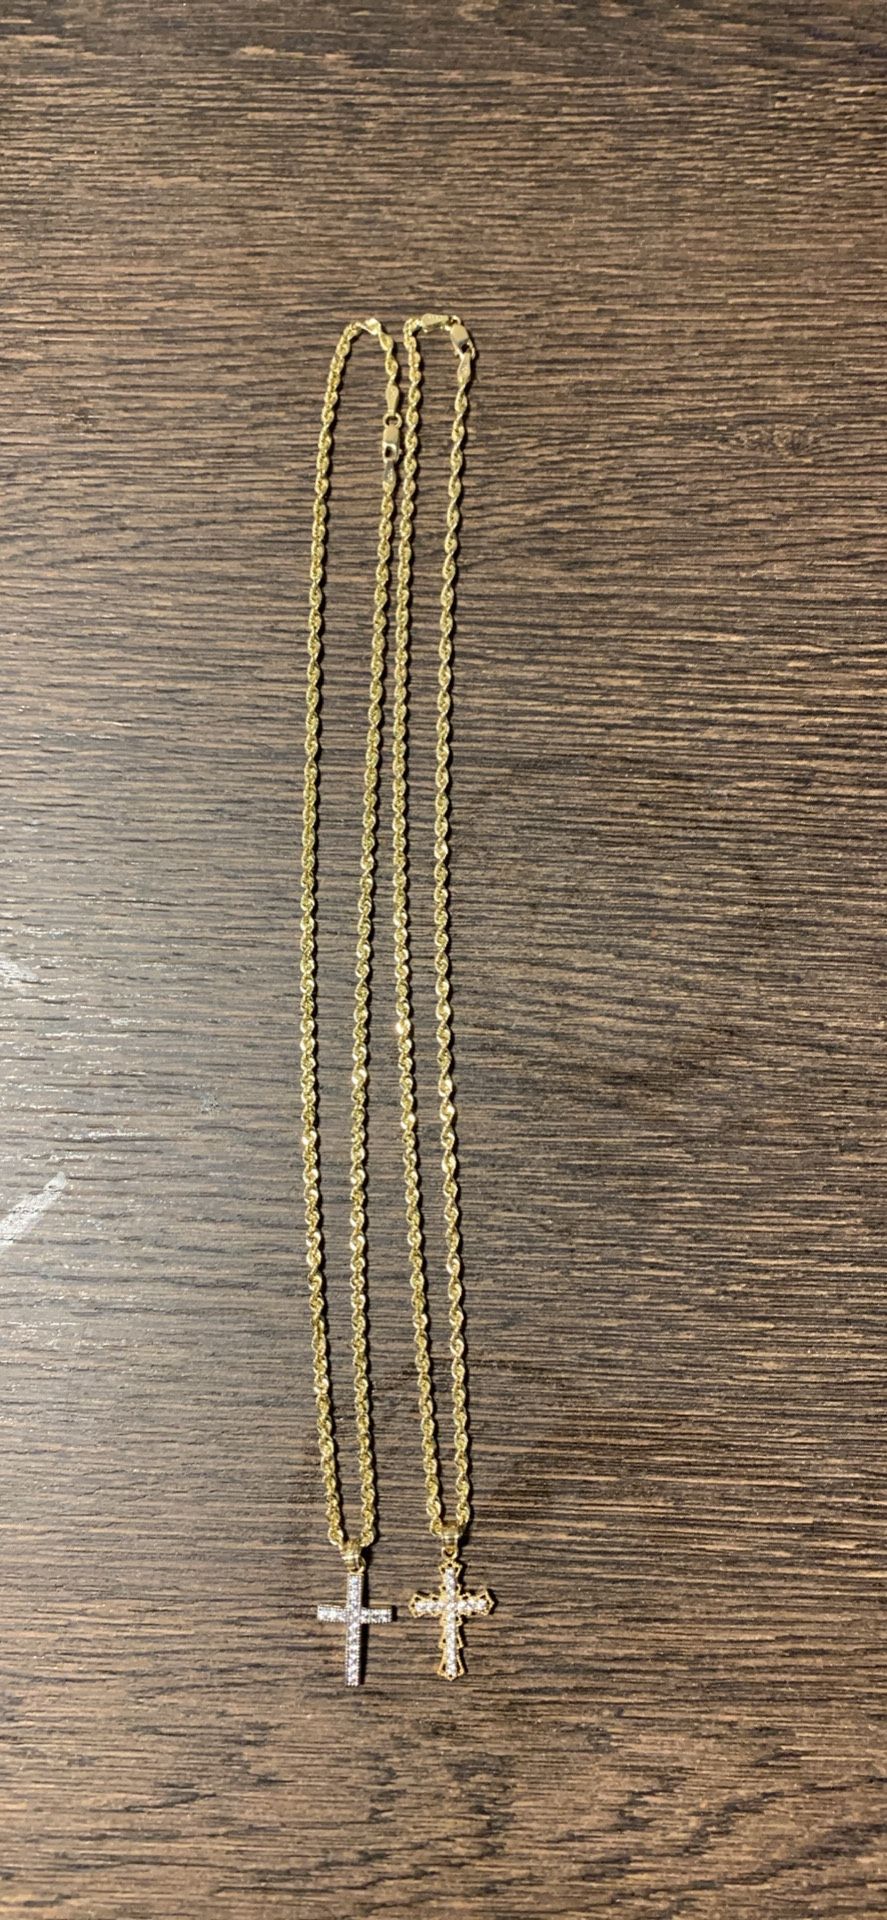 10 K Gold Rope Chains